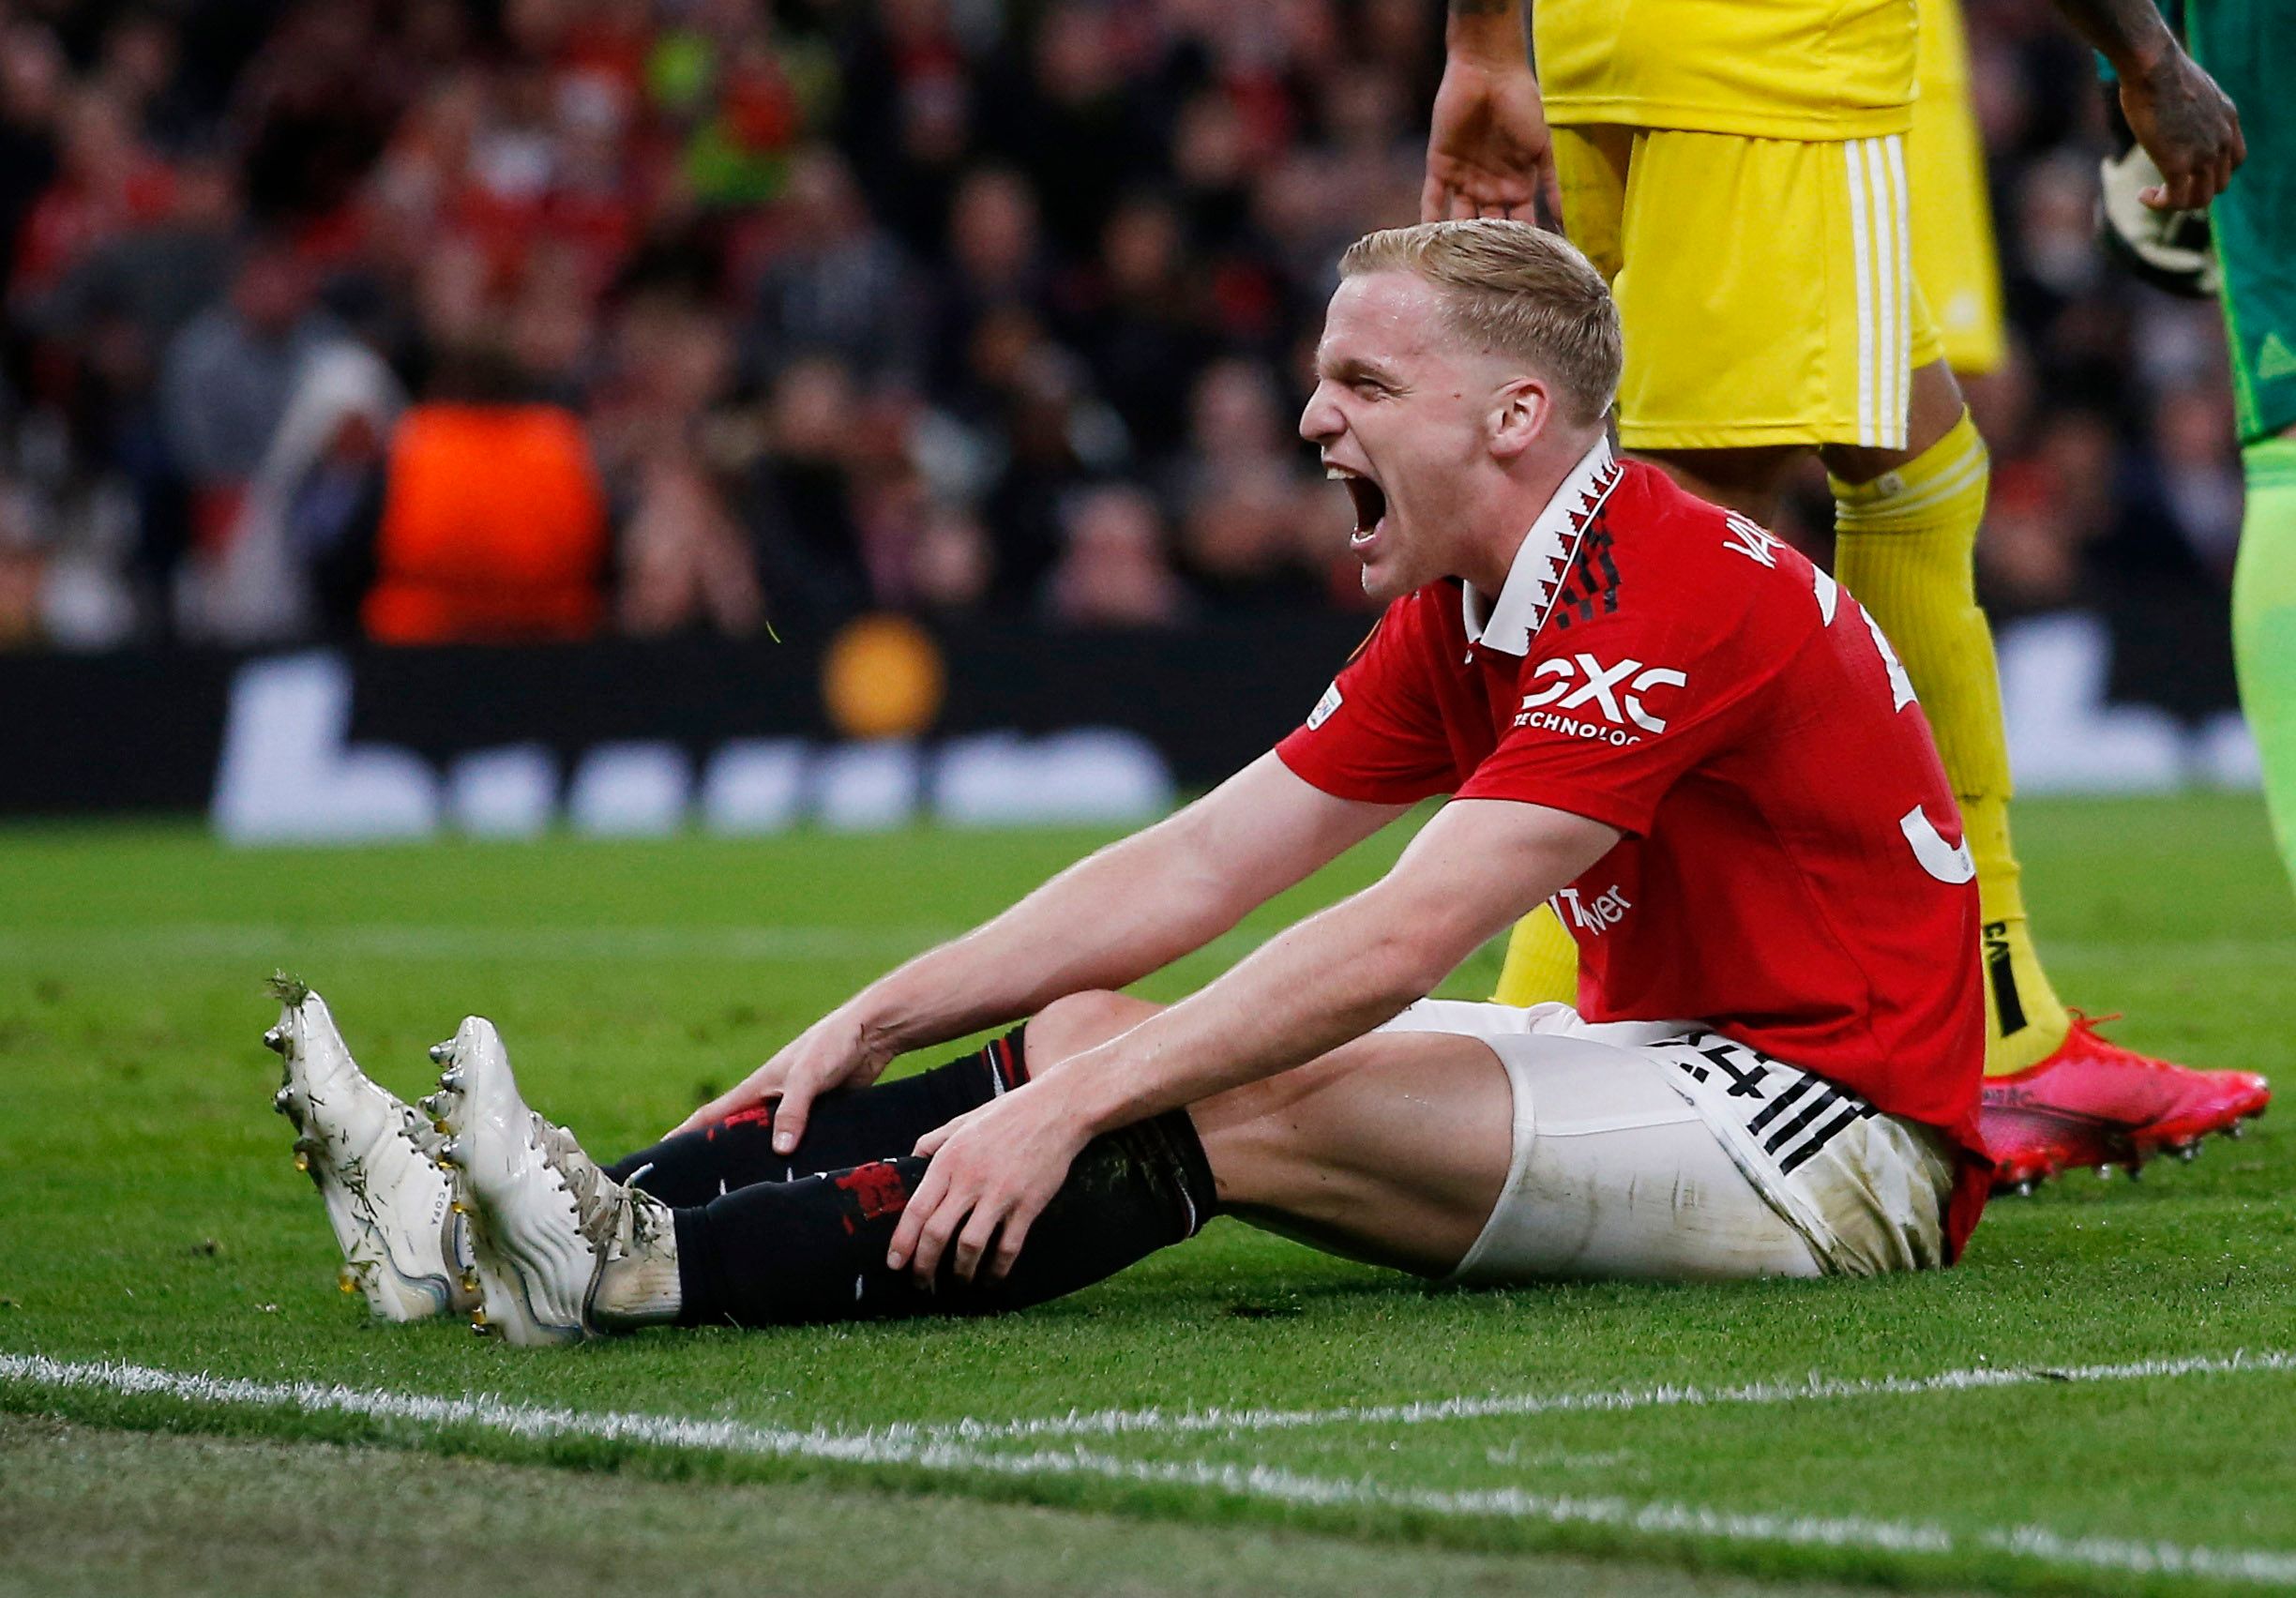 Soccer Football - Europa League - Group E - Manchester United v Sheriff Tiraspol - Old Trafford, Manchester, Britain - October 27, 2022 Manchester United's Donny van de Beek reacts after missing a chance to score REUTERS/Craig Brough